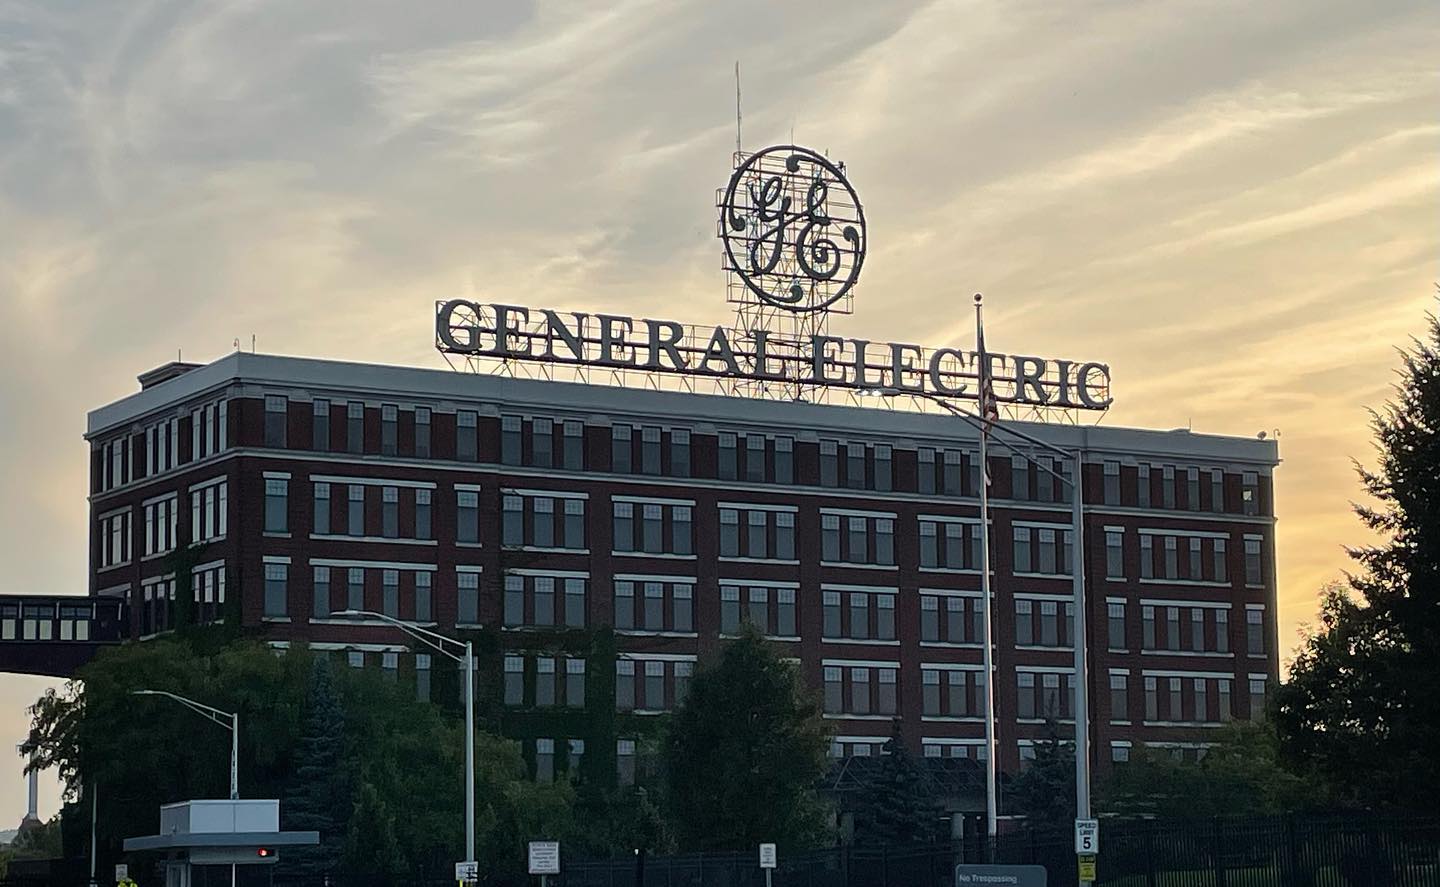 This week I’m in Schenectady, NY. Did you know that General Electric (GE) was “born” in Schenectady?  The Edison Machine company moved to Schenectady in 1886. Edison later merged its various companies into Edison General Electric. Edison then merged with the Thomson-Houston Electric Company in 1892, becoming General Electric. Today the campus is still very active, and is home to GE Power. At various points GE was the largest company in the world. The plant is famous for its development and production of giant turbines and generators that are still in use in power plants all over the globe. #generalelectric #schenectady #happyupstate #upstateindustrialhistory#capitaldistrictny #capitalsistrict #albanyny#albany#ilovenewyork #upstateny #upstatenewyork